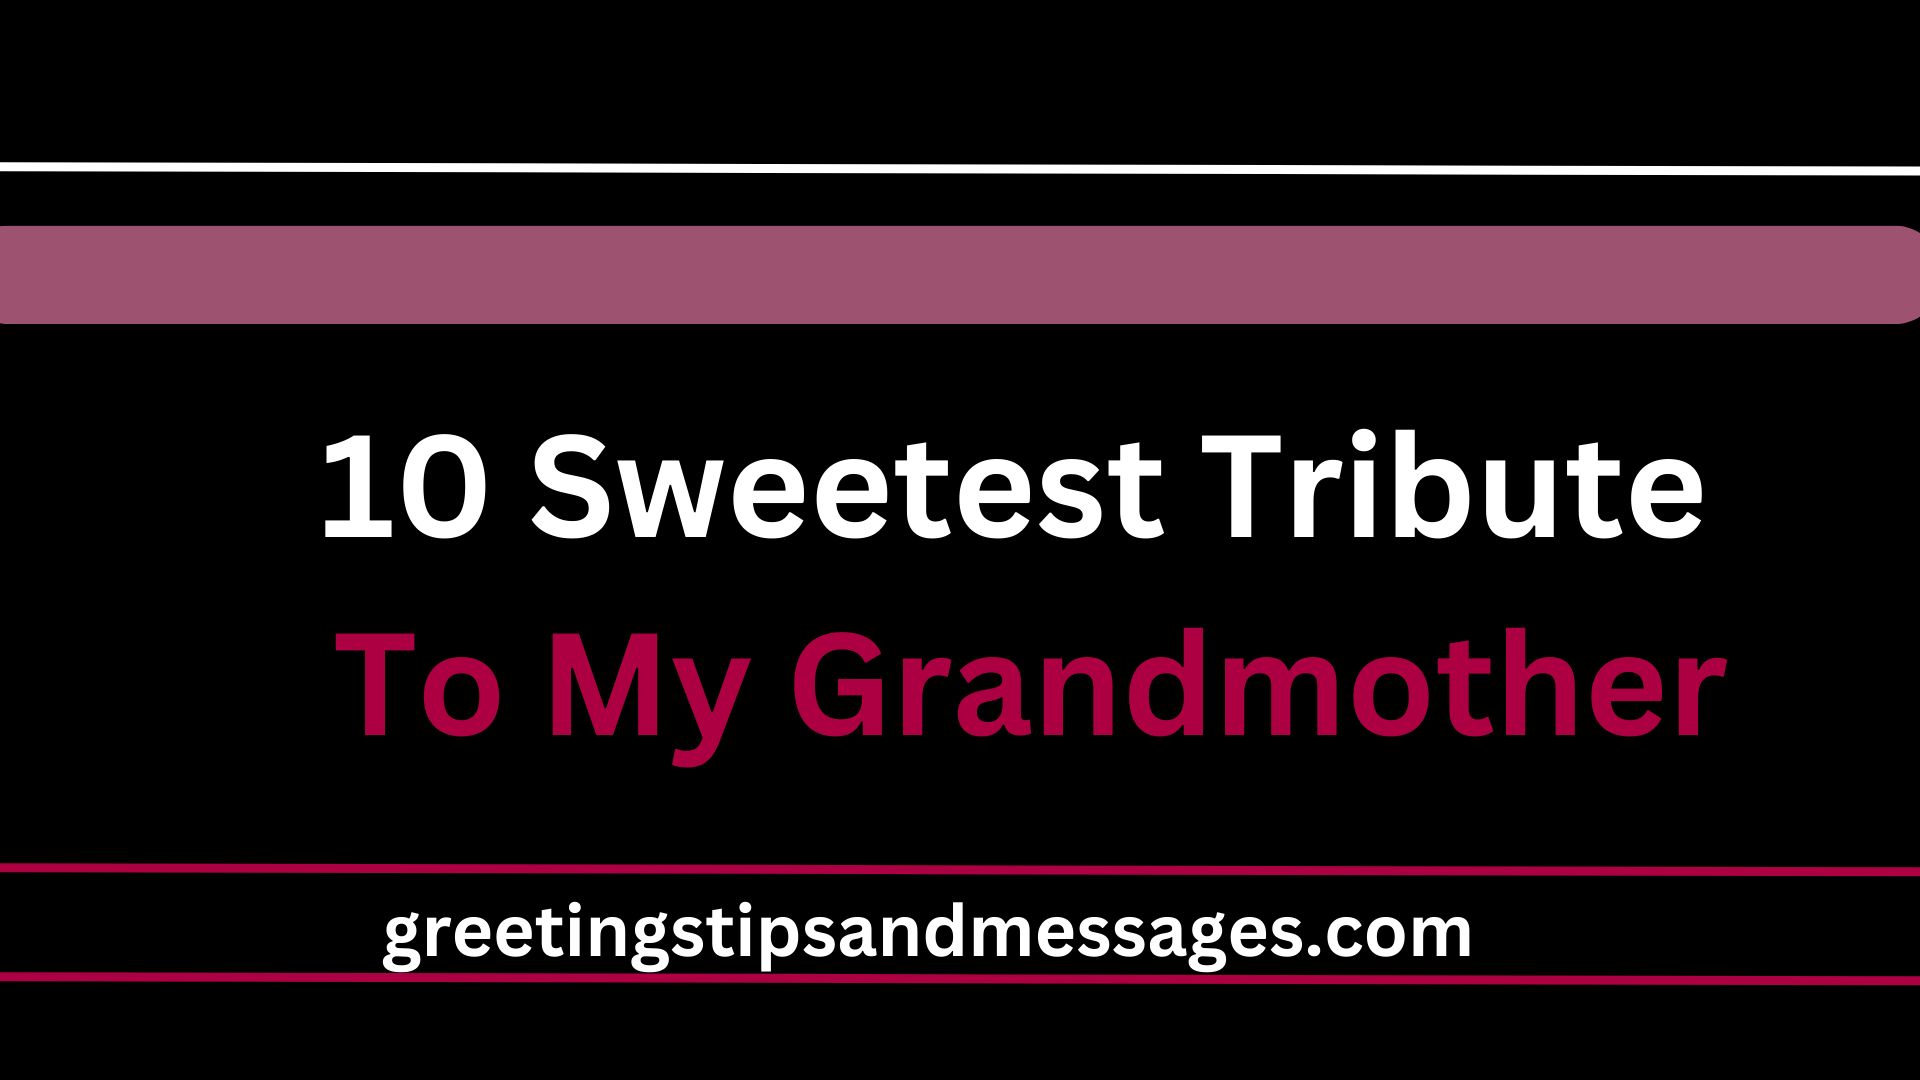 10 Sweetest Tribute To My Grandmother